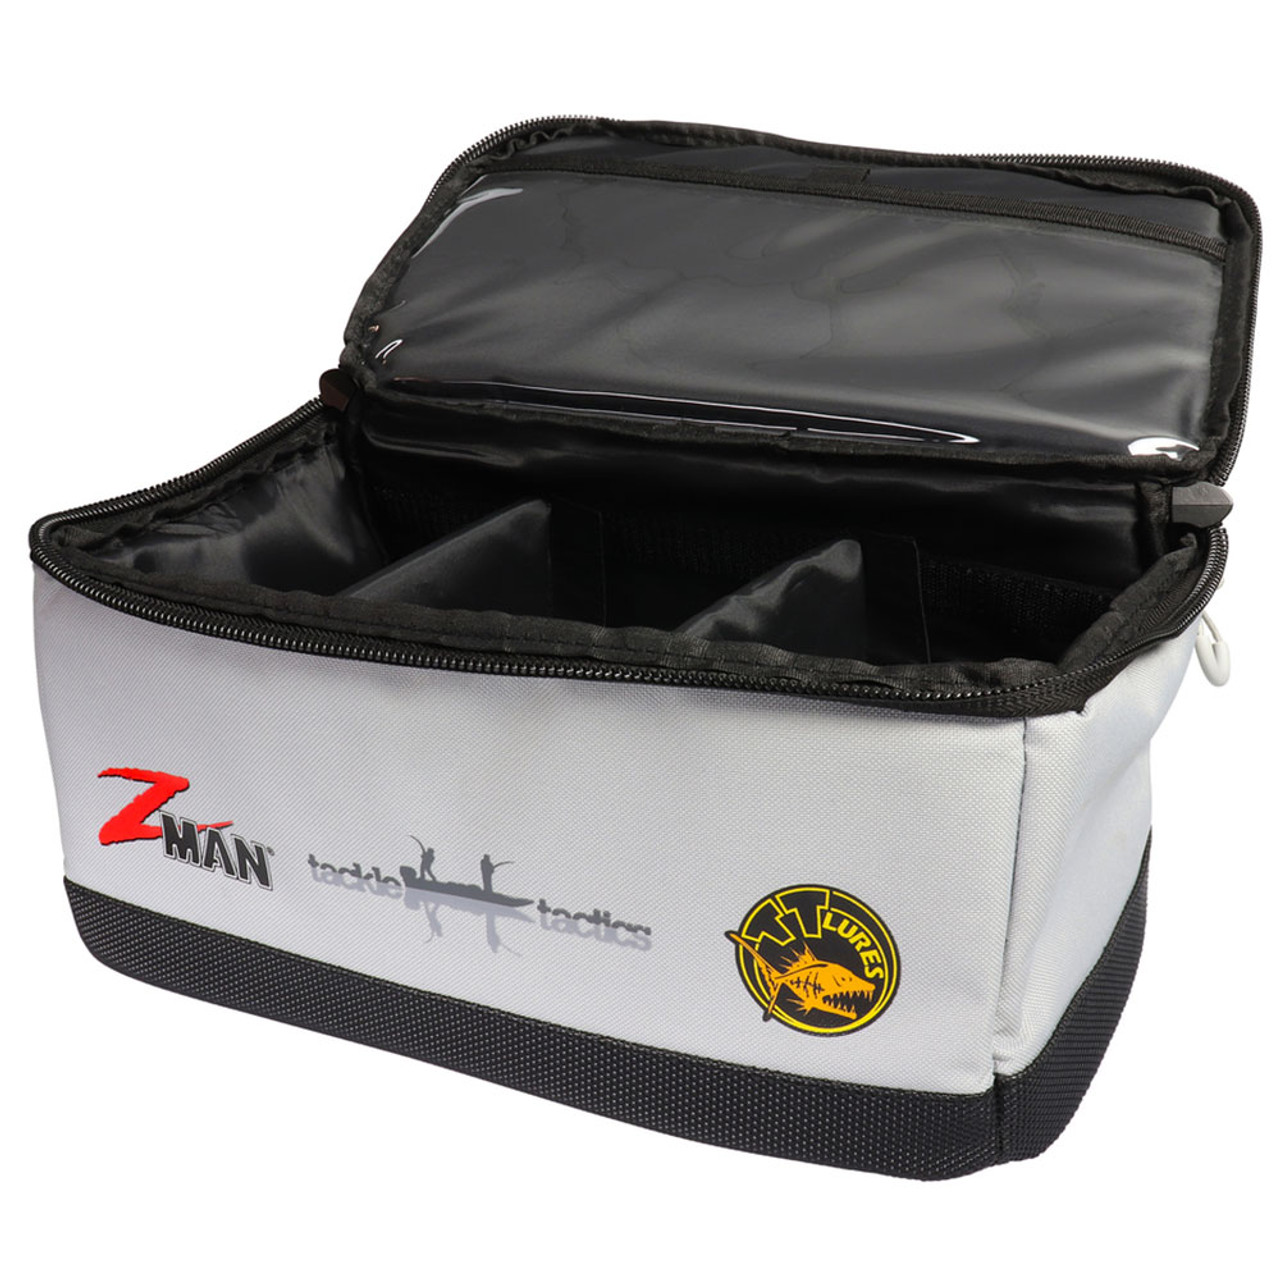 TT Deluxe Z-Man Structured Soft Tackle Block Bag